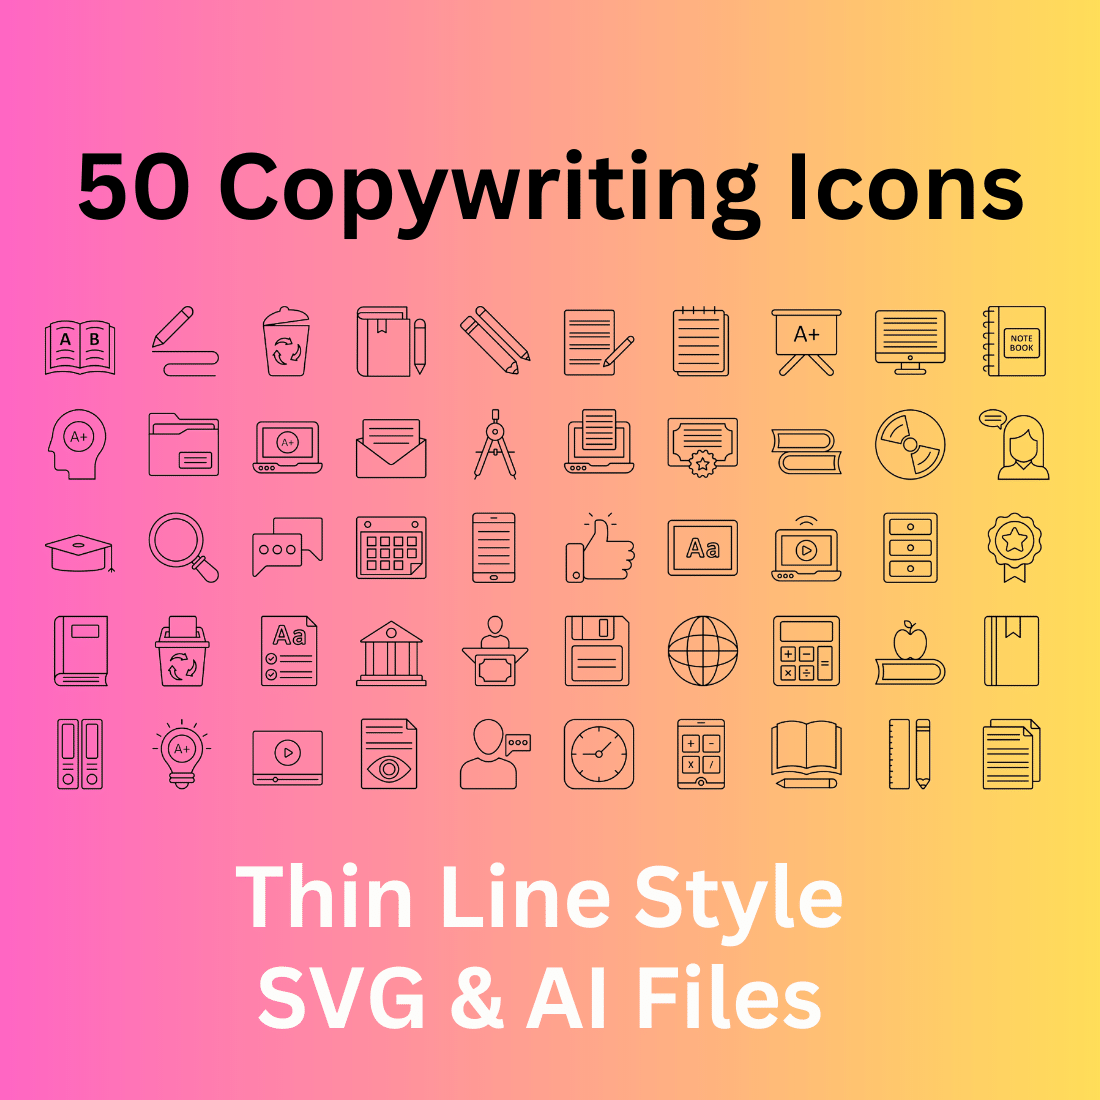 Copywriting Icon Set 50 Outline Icons - SVG And AI Files cover image.